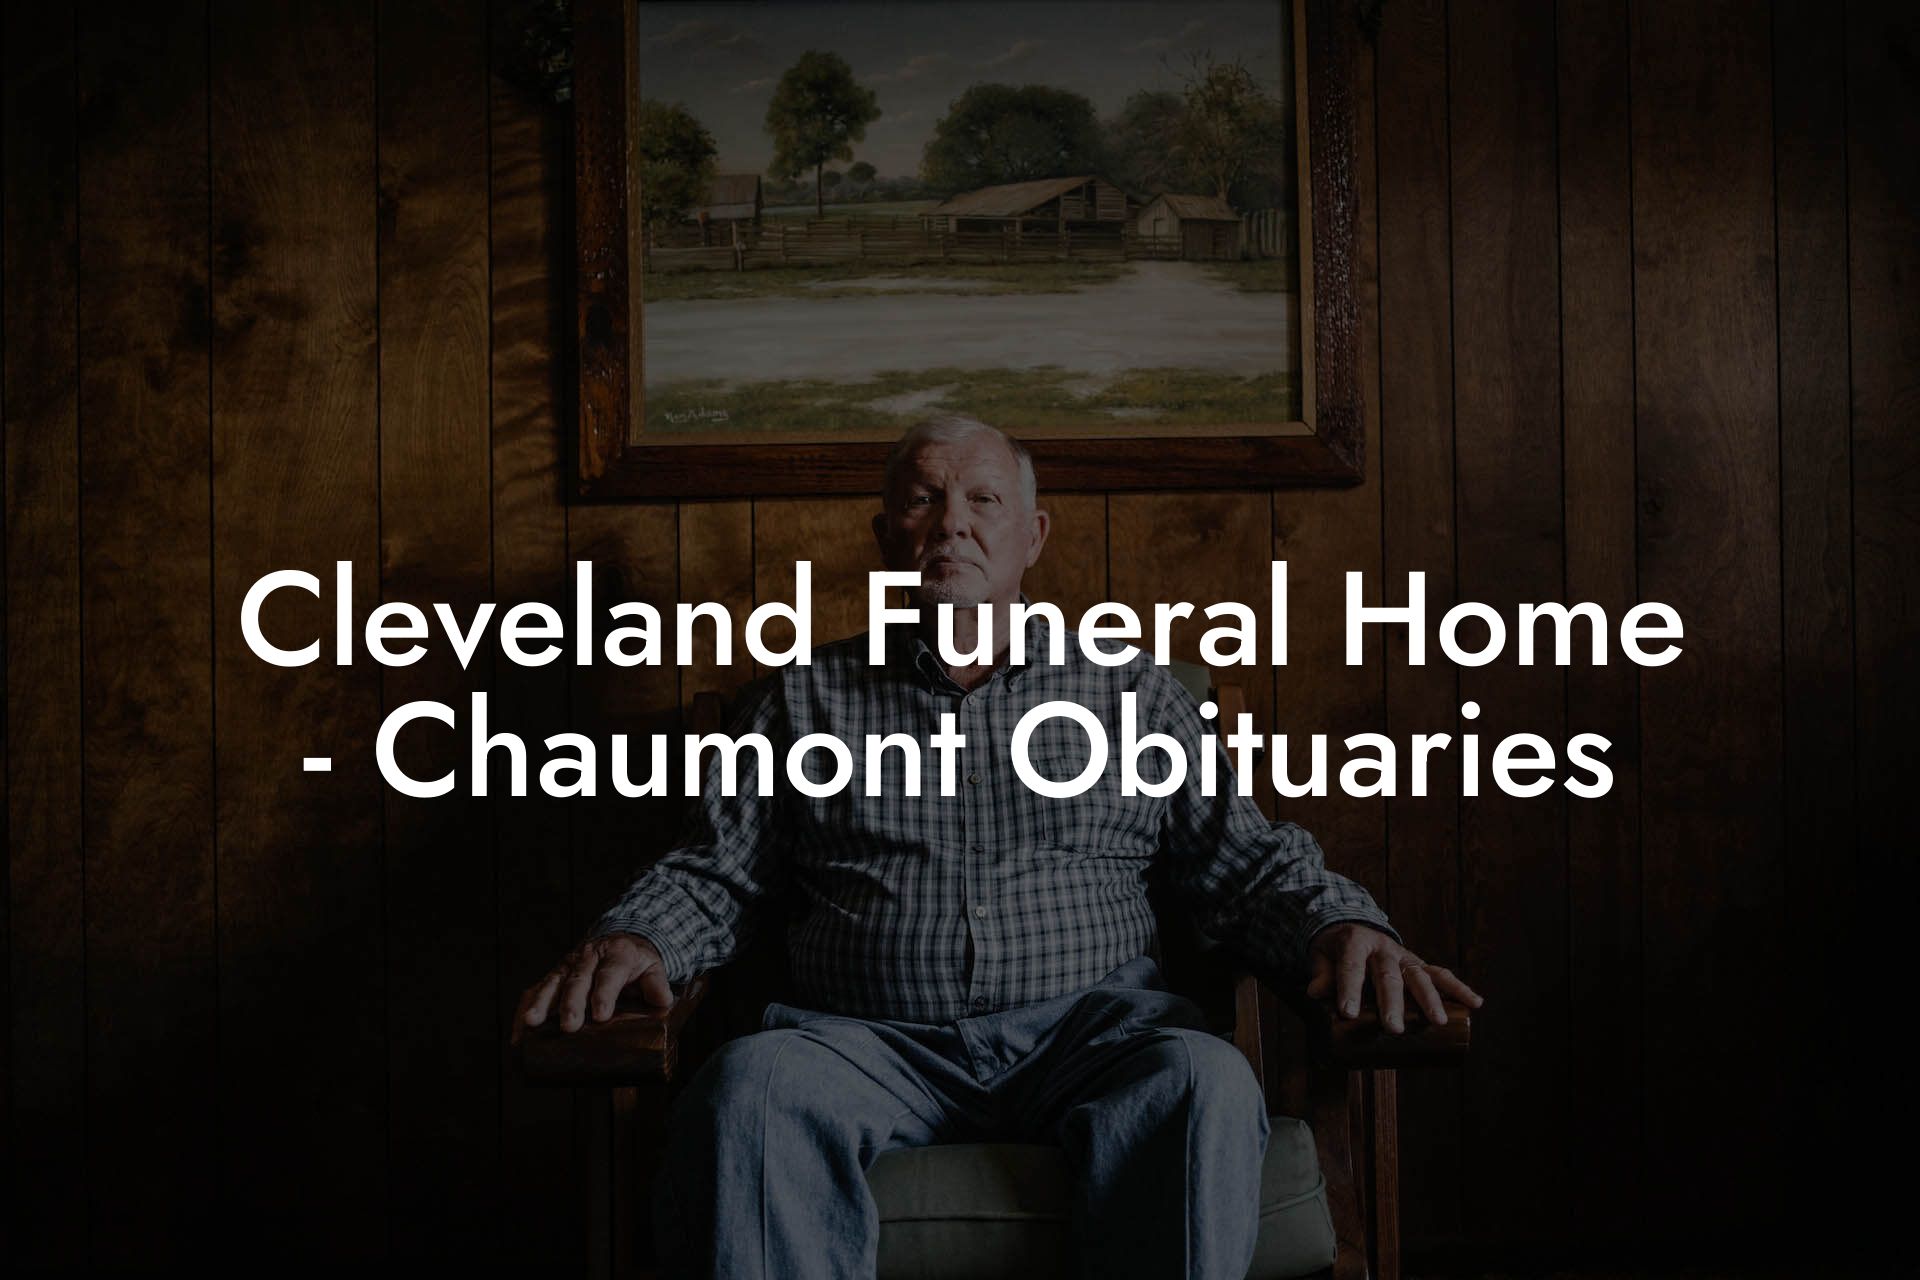 Cleveland Funeral Home - Chaumont Obituaries